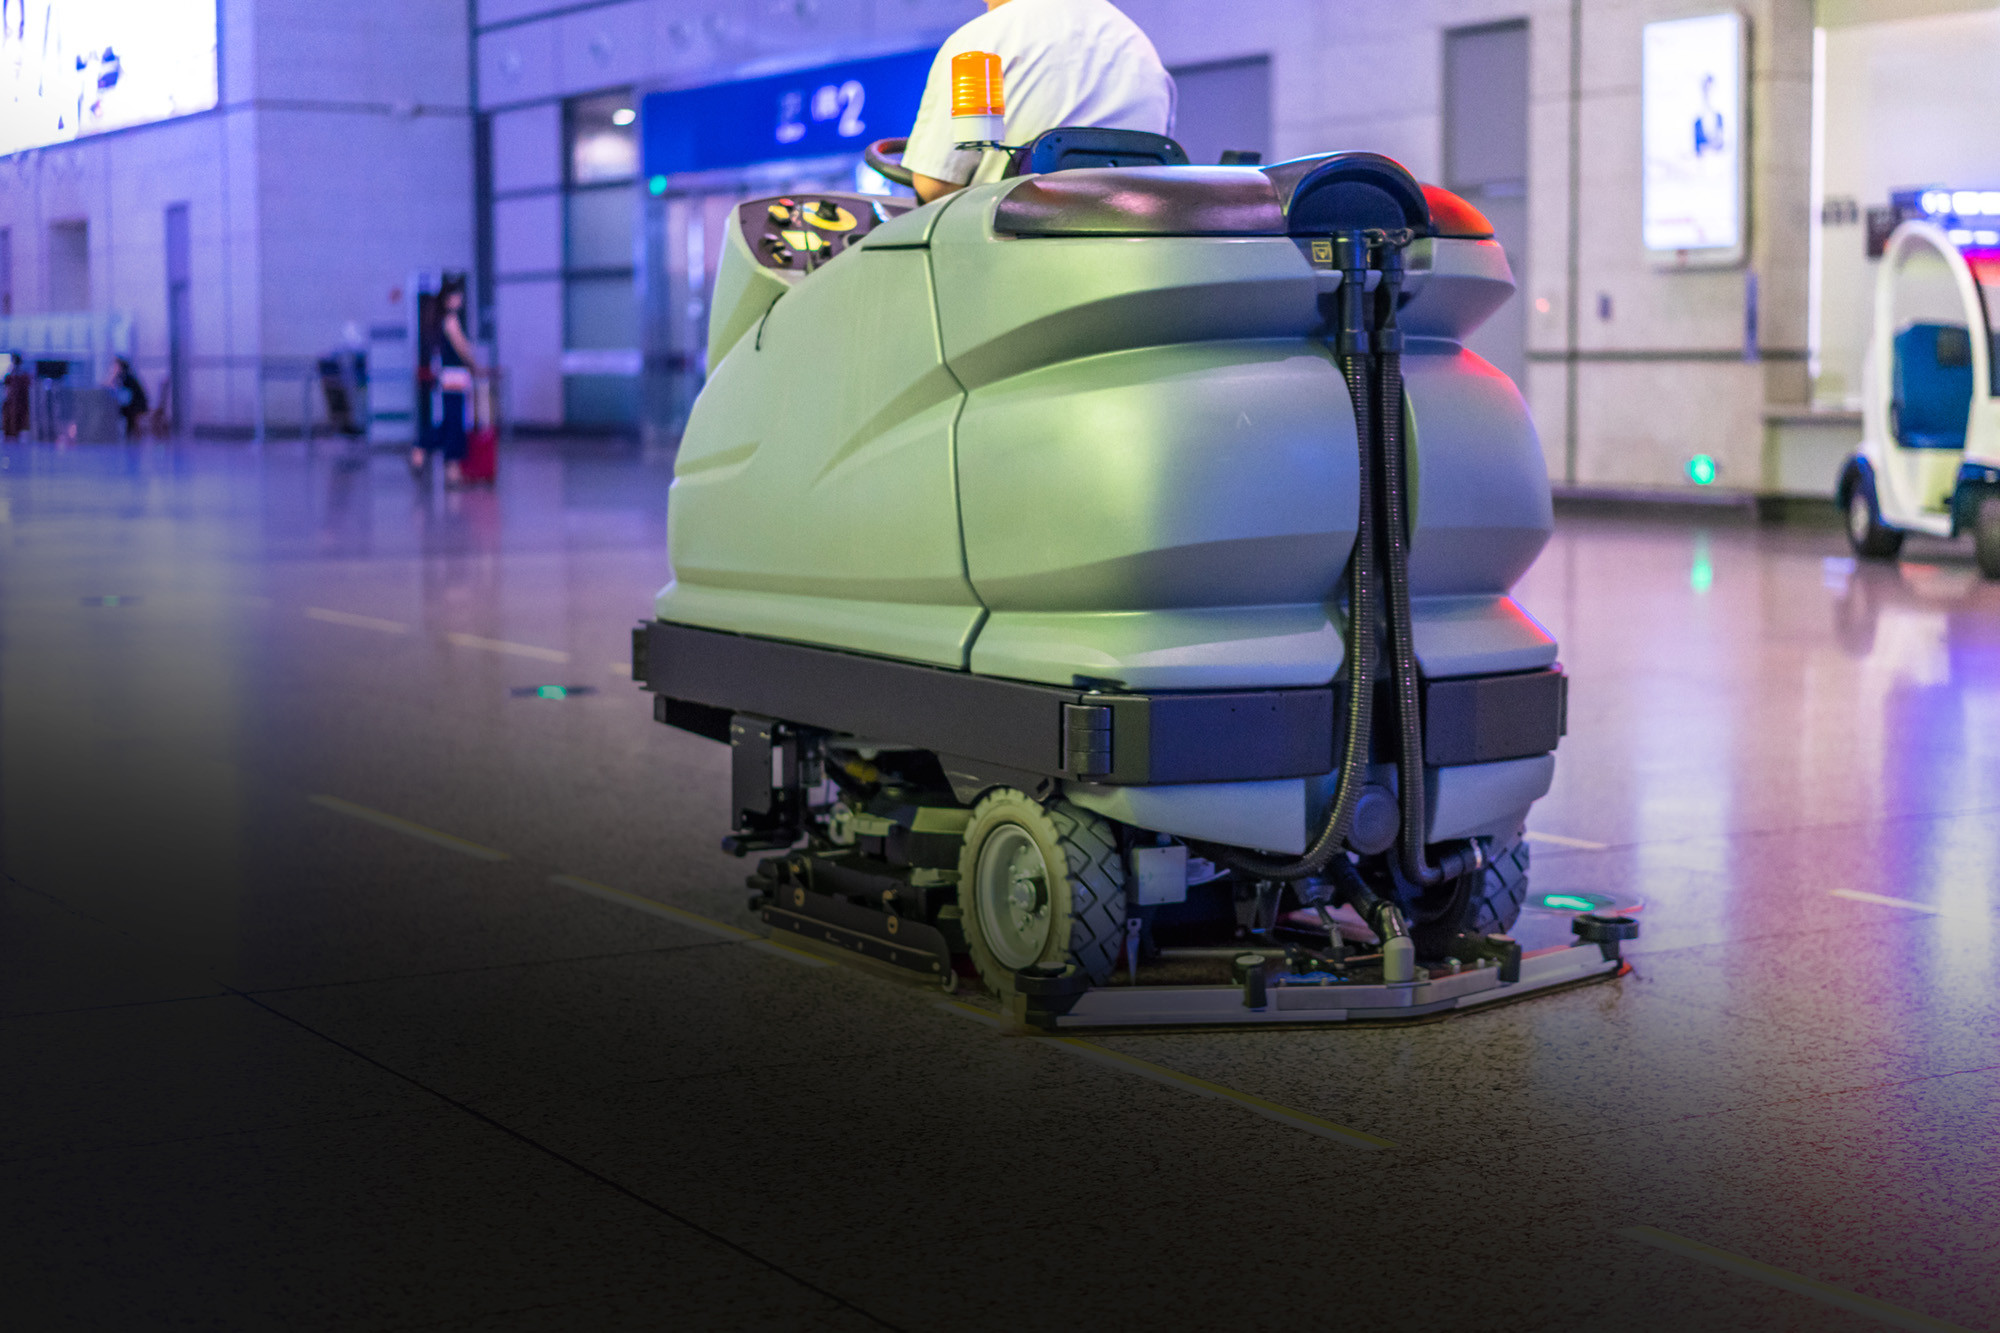 Electric powered cleaning machines for demanding applications